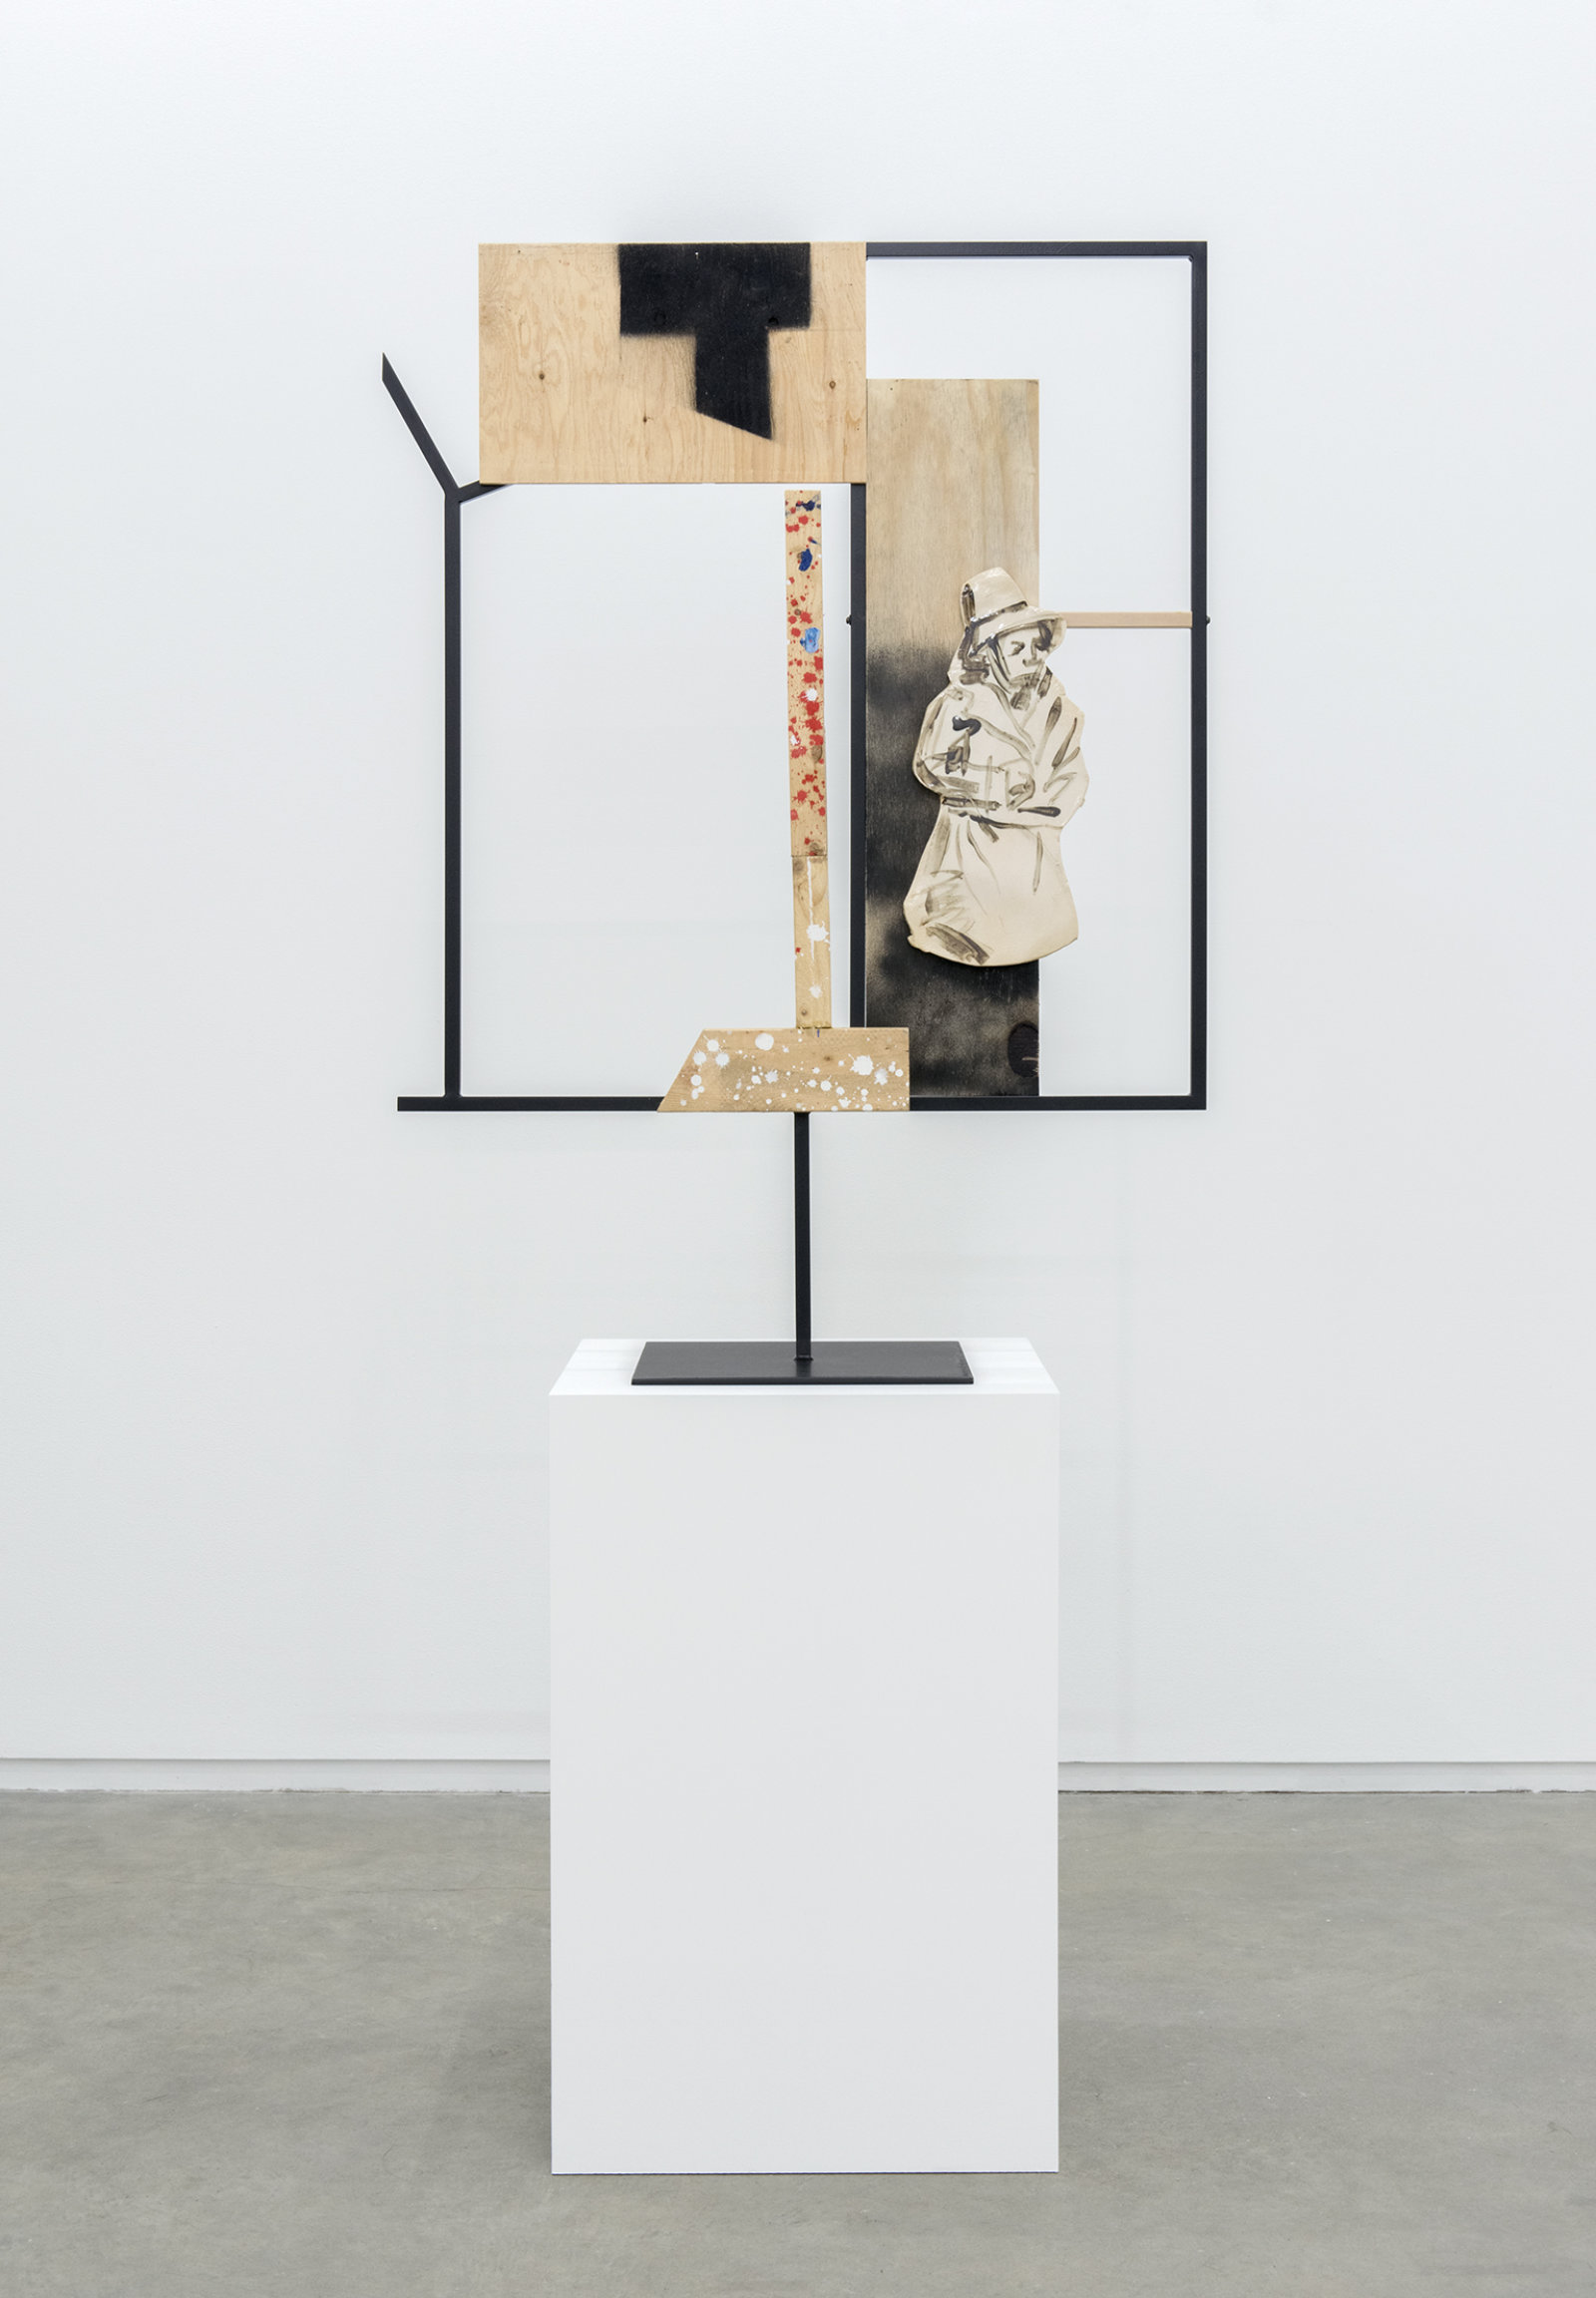 Damian Moppett, Exhibition at 22 Fitzroy St. London, May 1953, 2013, paint, stoneware, wood, 78 x 35 x 20 in. (198 x 88 x 51 cm)